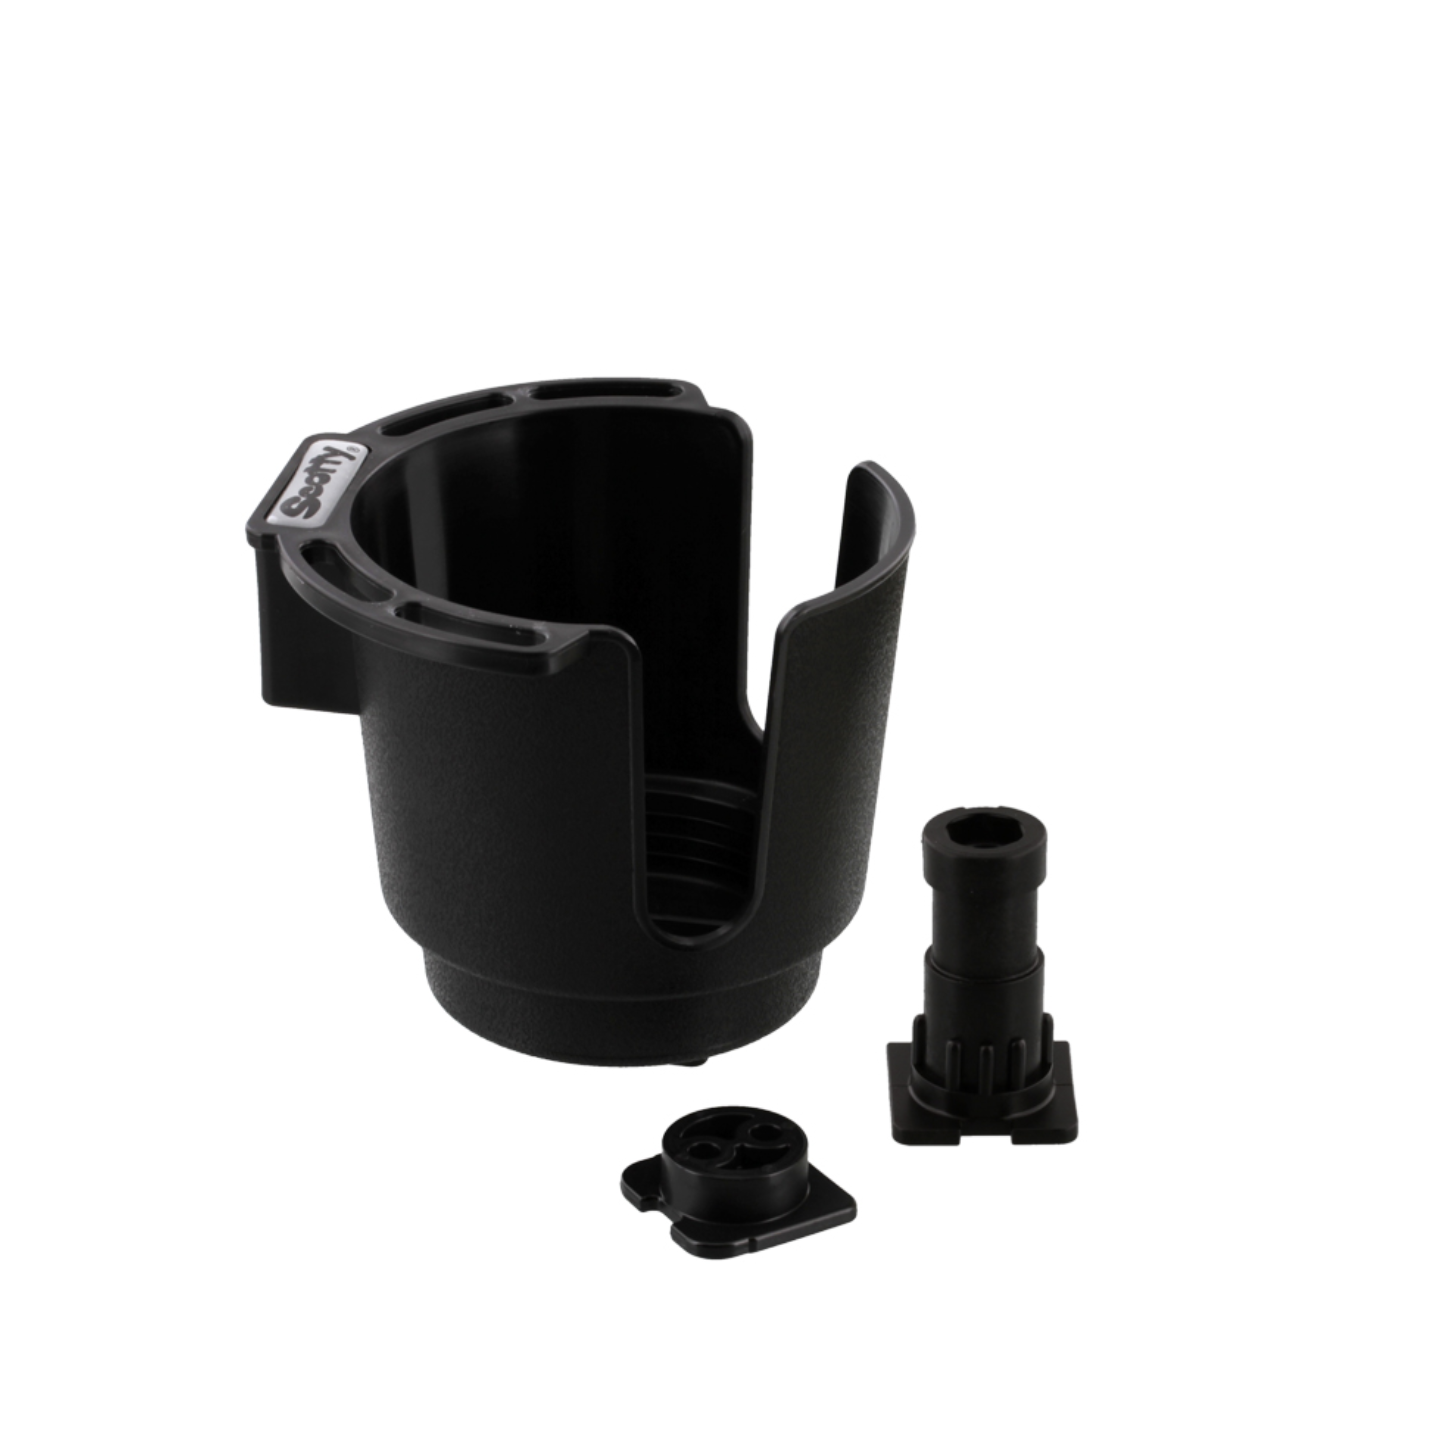 Mounts, Tracks & Accessories: 311 Scotty Cup Holder by Scotty - Image 4143